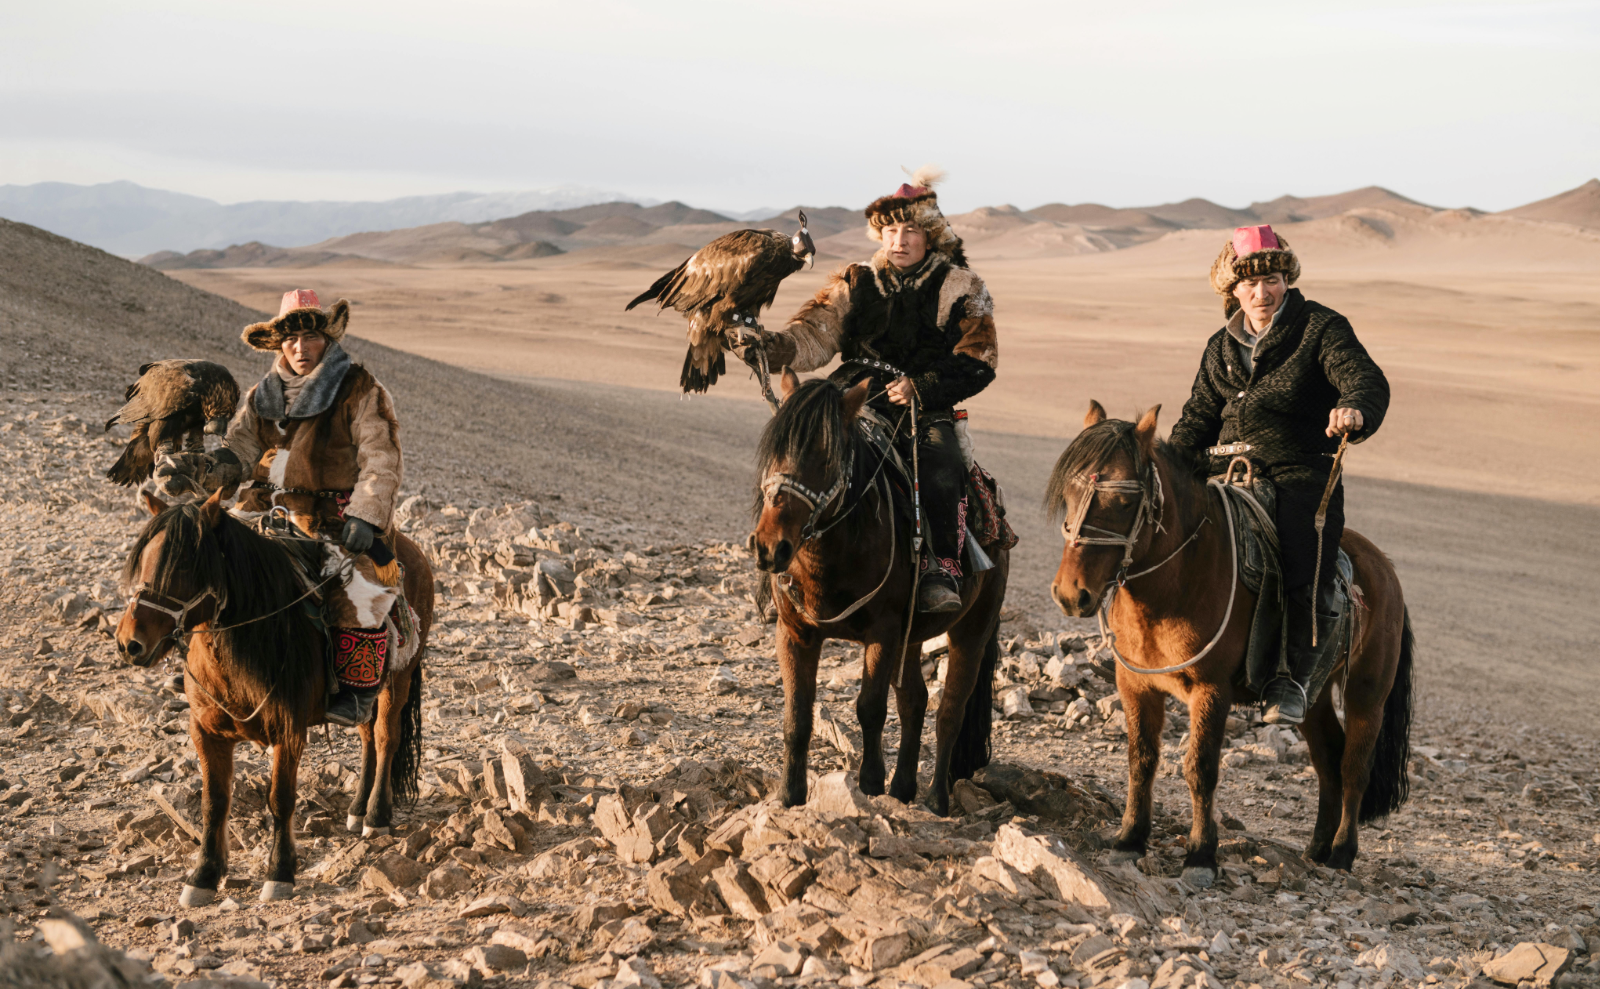 three mongolian falconers in traditional clothing sit on horseback while holding falcons on their wrists with the flat plains of the steppes behind them